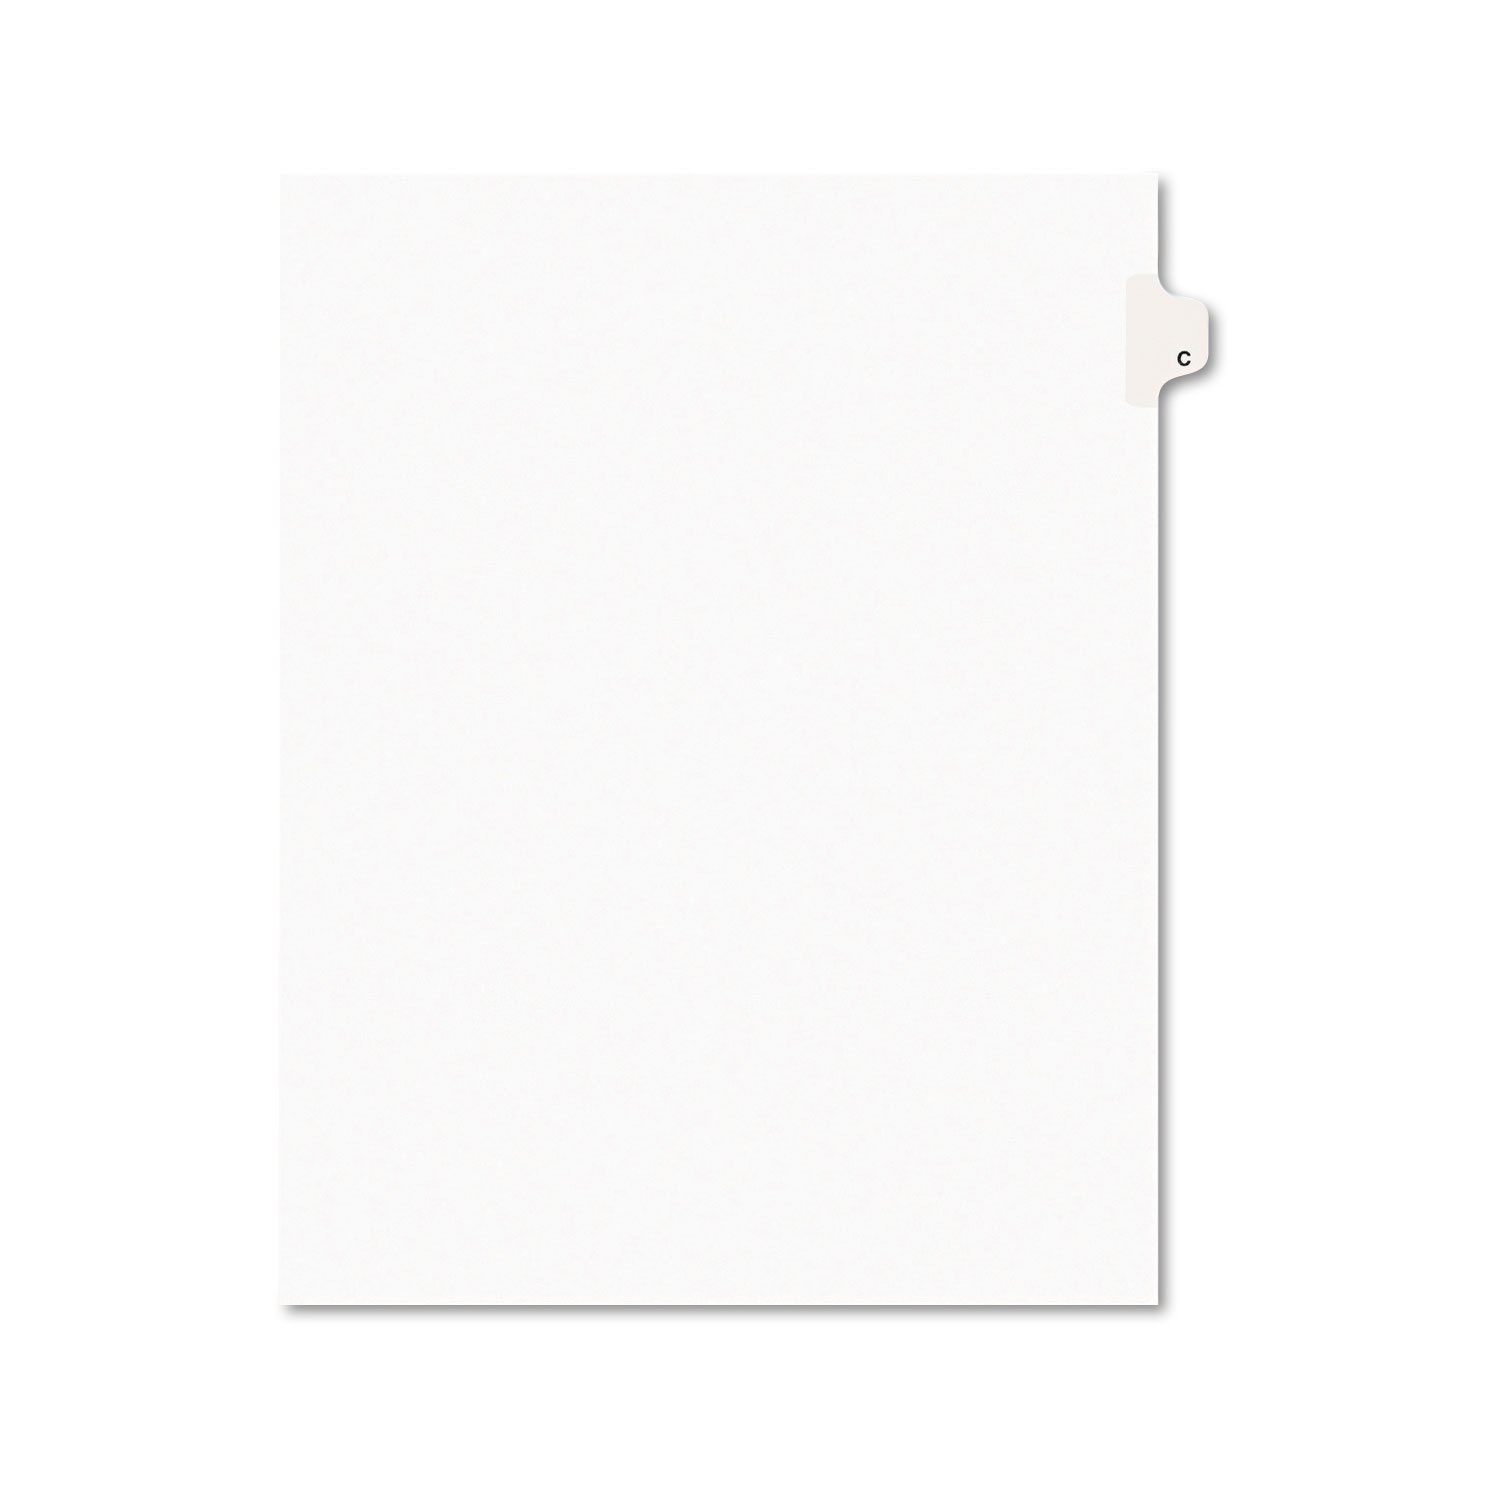  Avery 01403 Preprinted Legal Exhibit Side Tab Index Dividers, Avery Style, 26-Tab, C, 11 x 8.5, White, 25/Pack (AVE01403) 